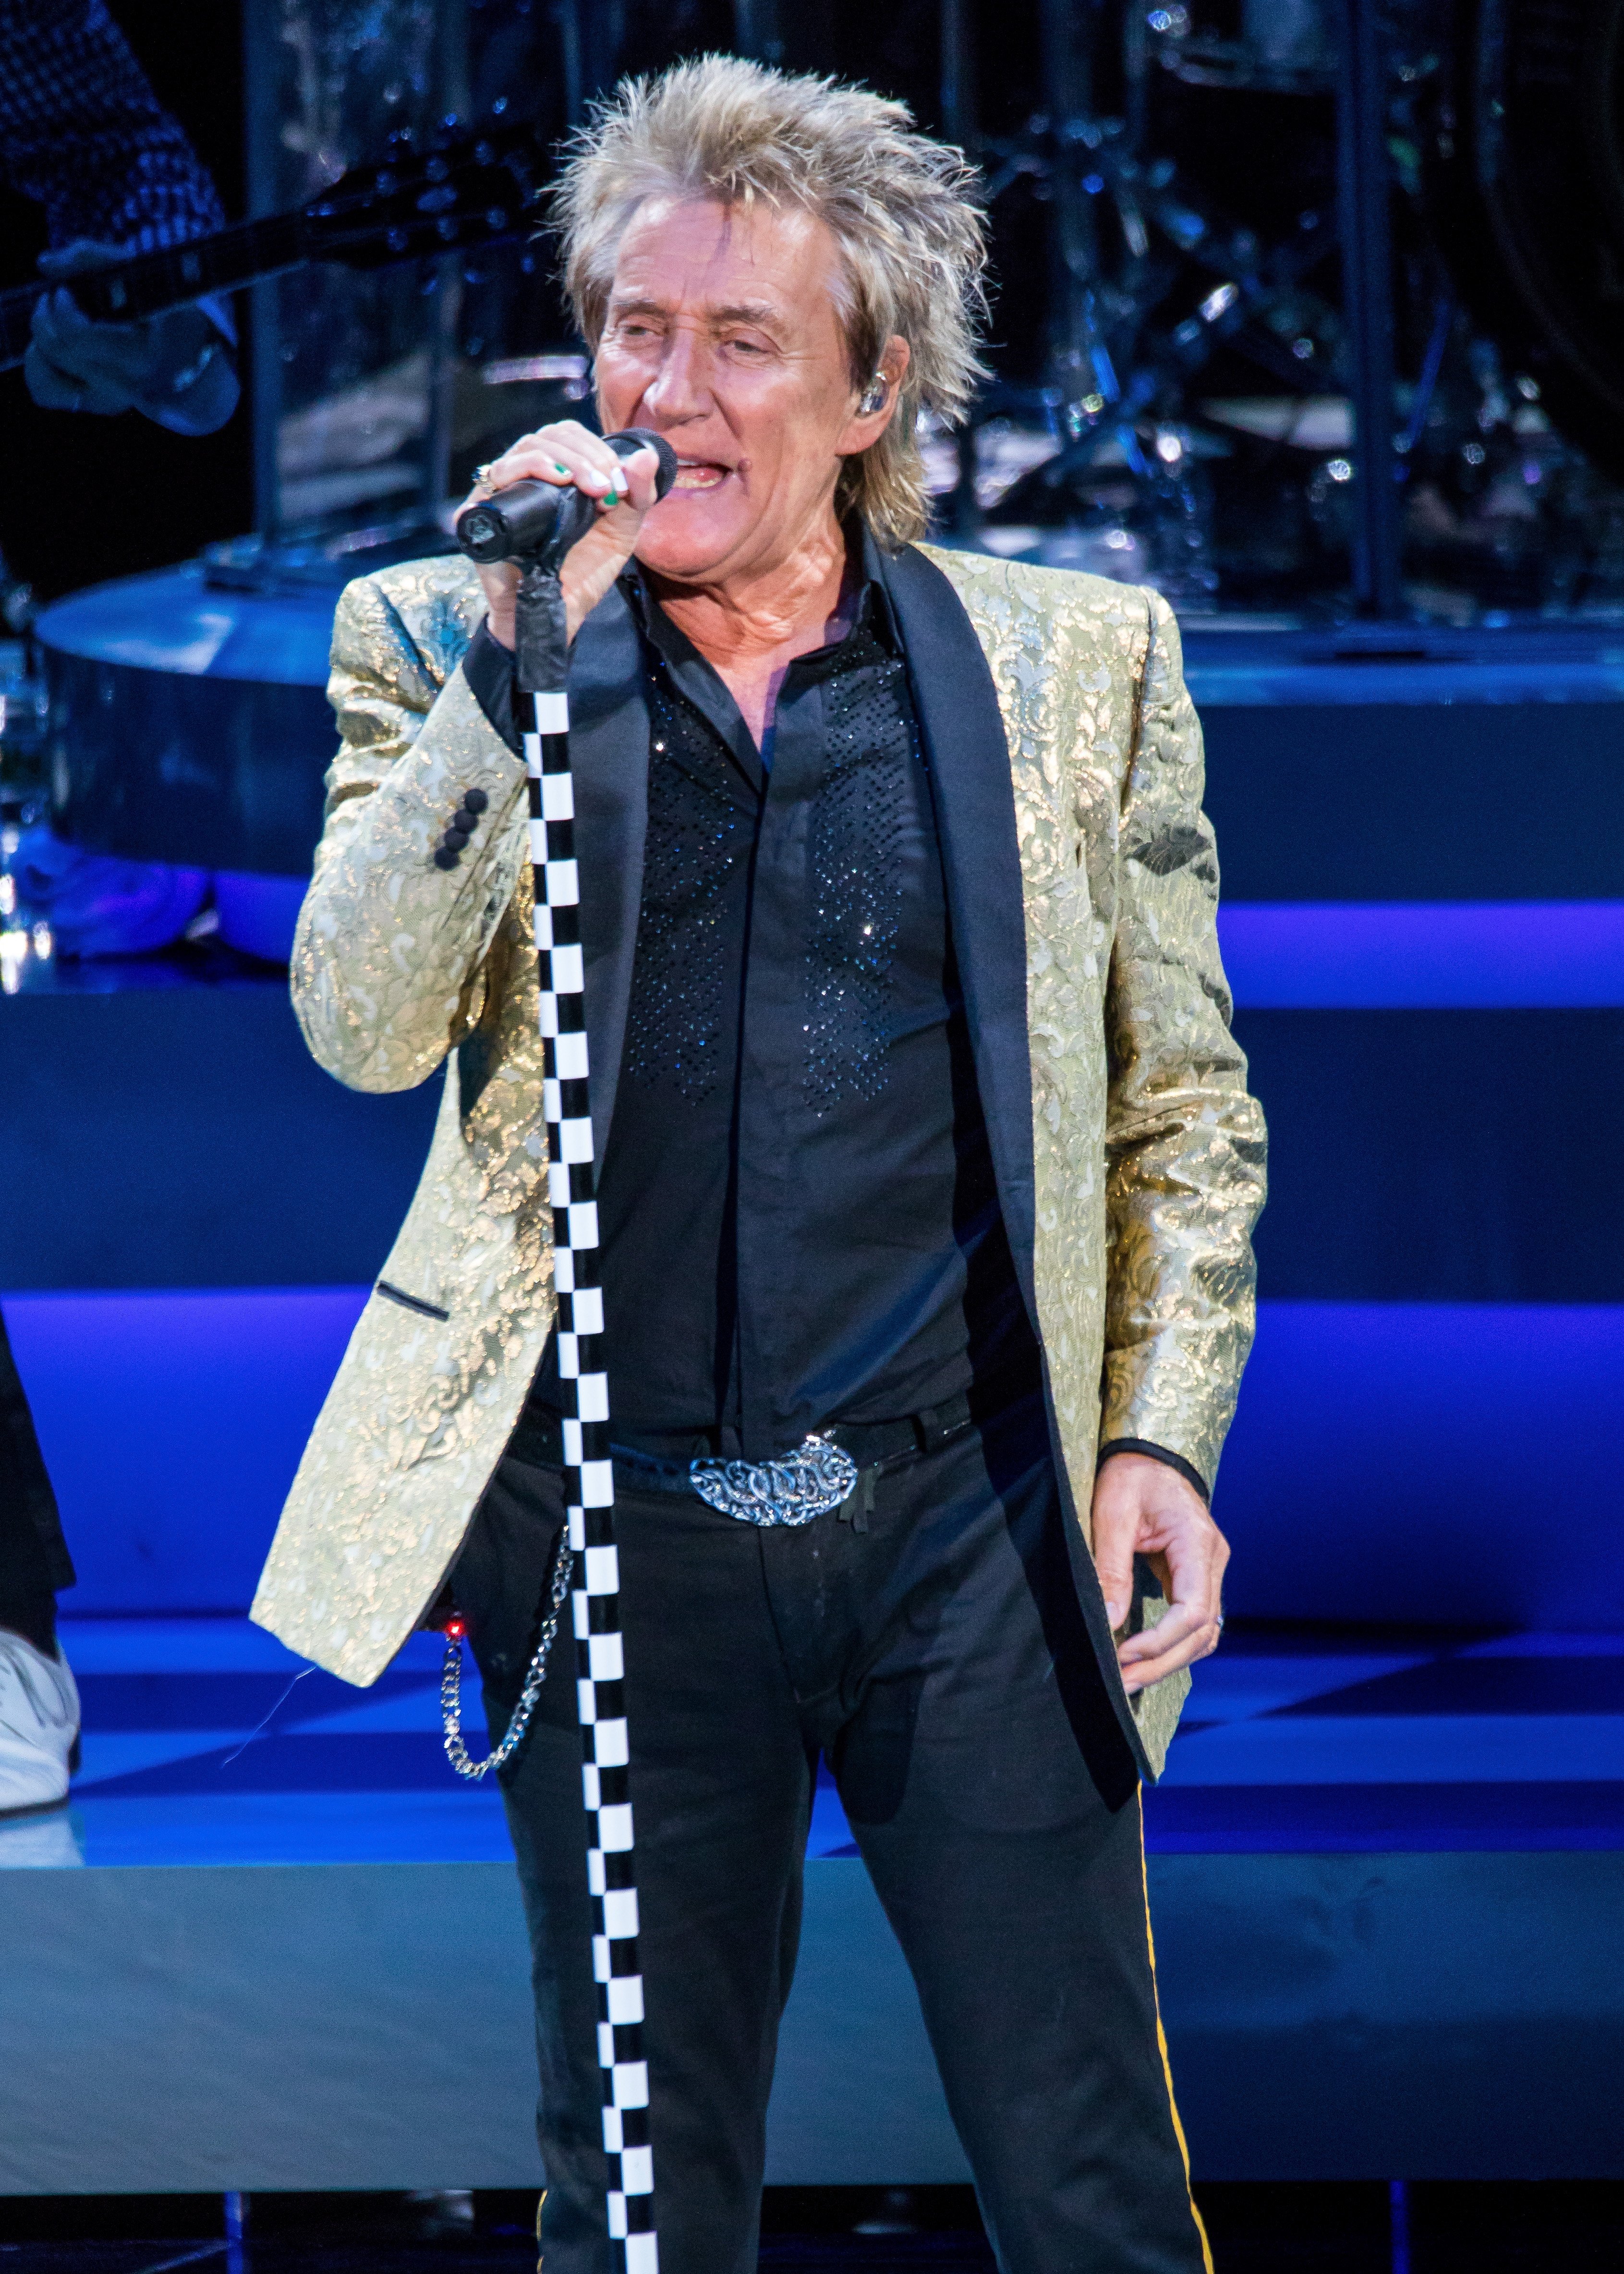 Rod Stewart performs at DTE Energy Music Theater on August 1, 2017 in Clarkston, Michigan | Photo: GettyImages 